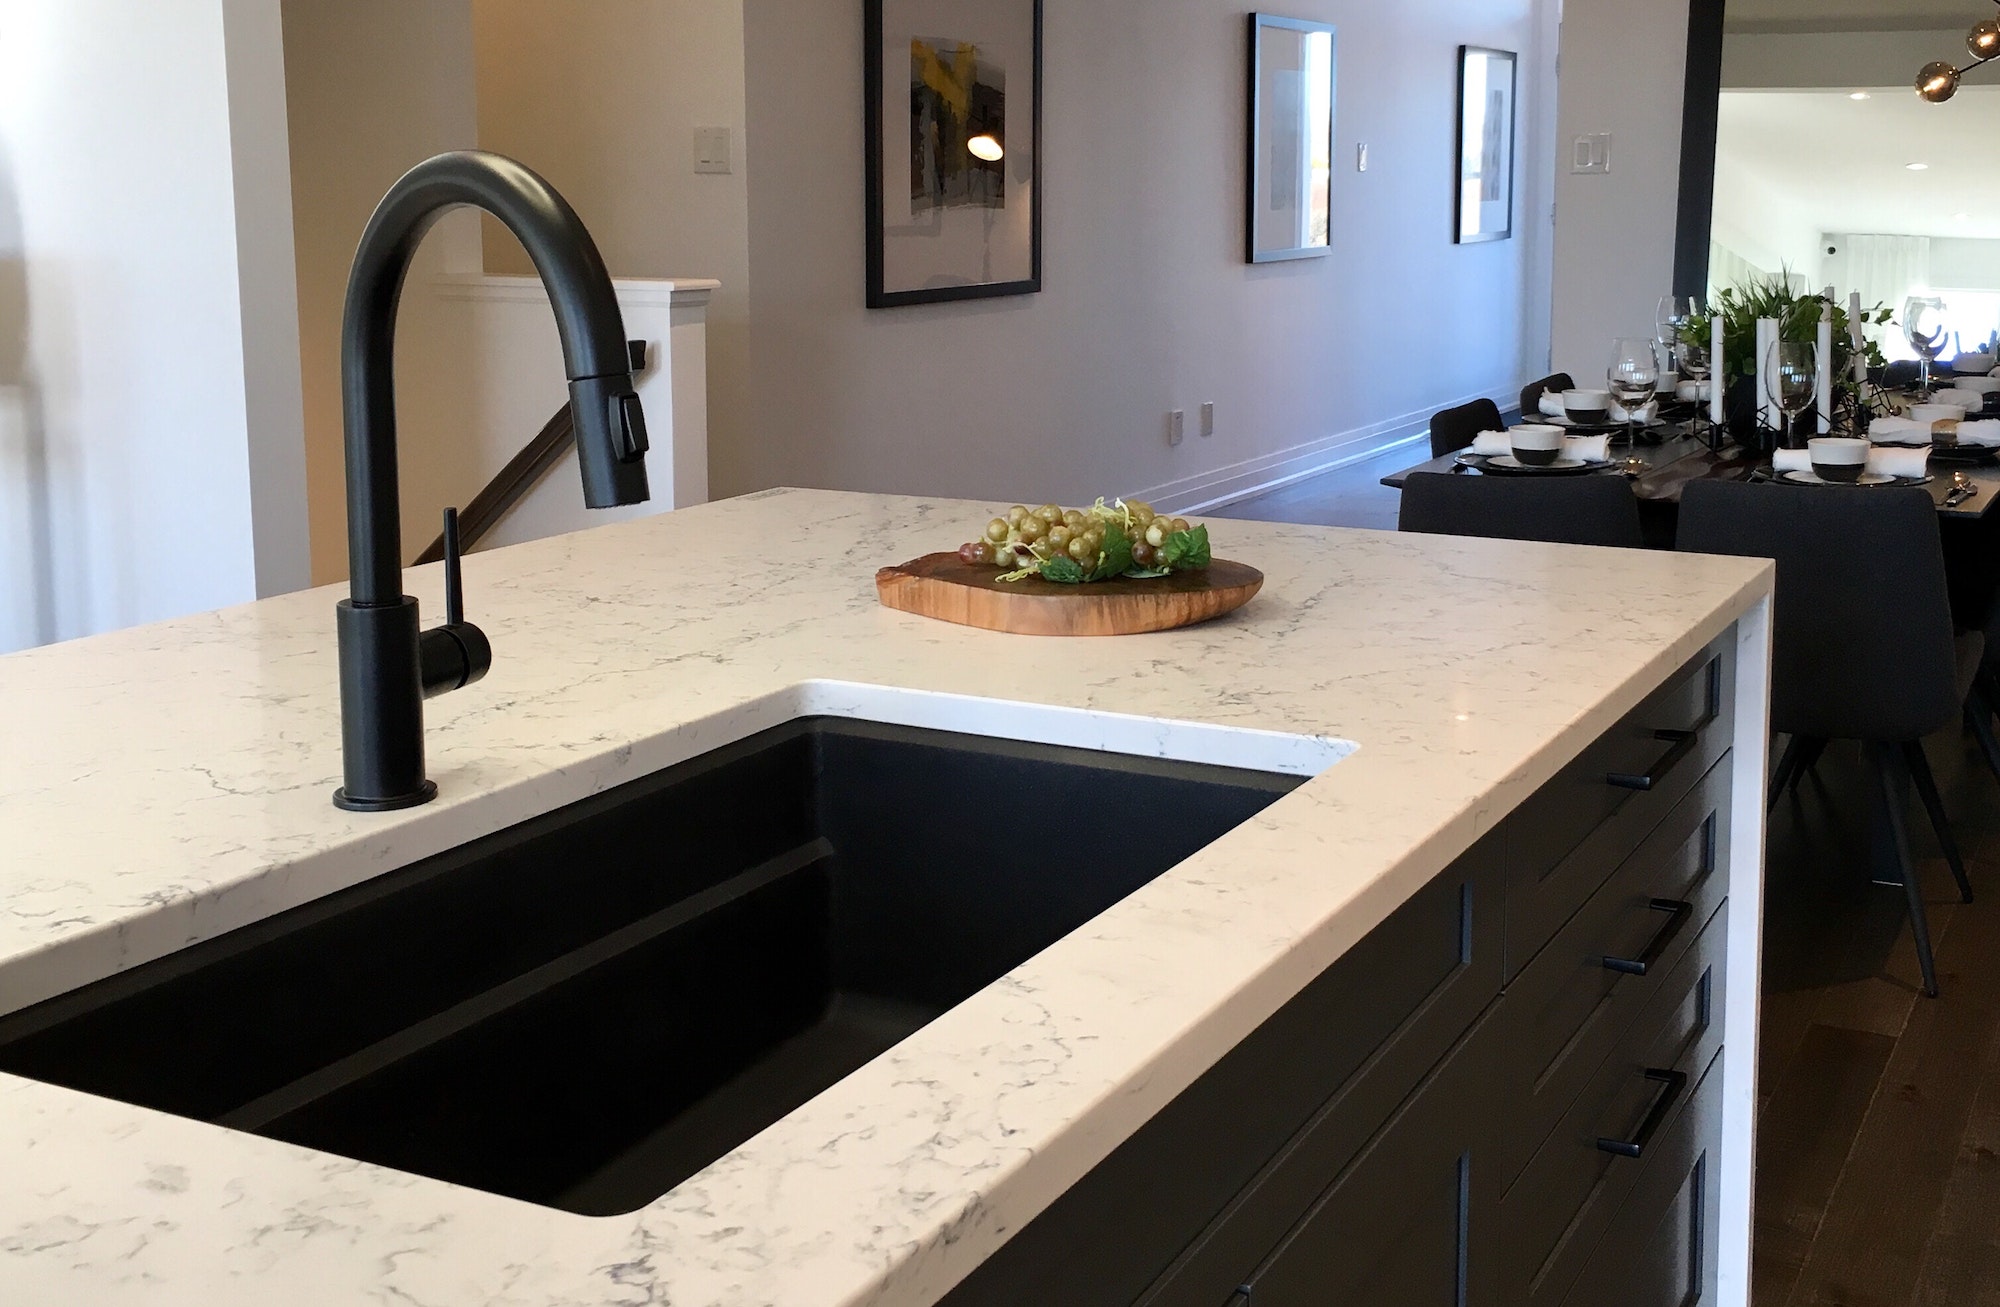 Black kitchen faucet and black recessed sink is trendy and fashionable, stylish interior design